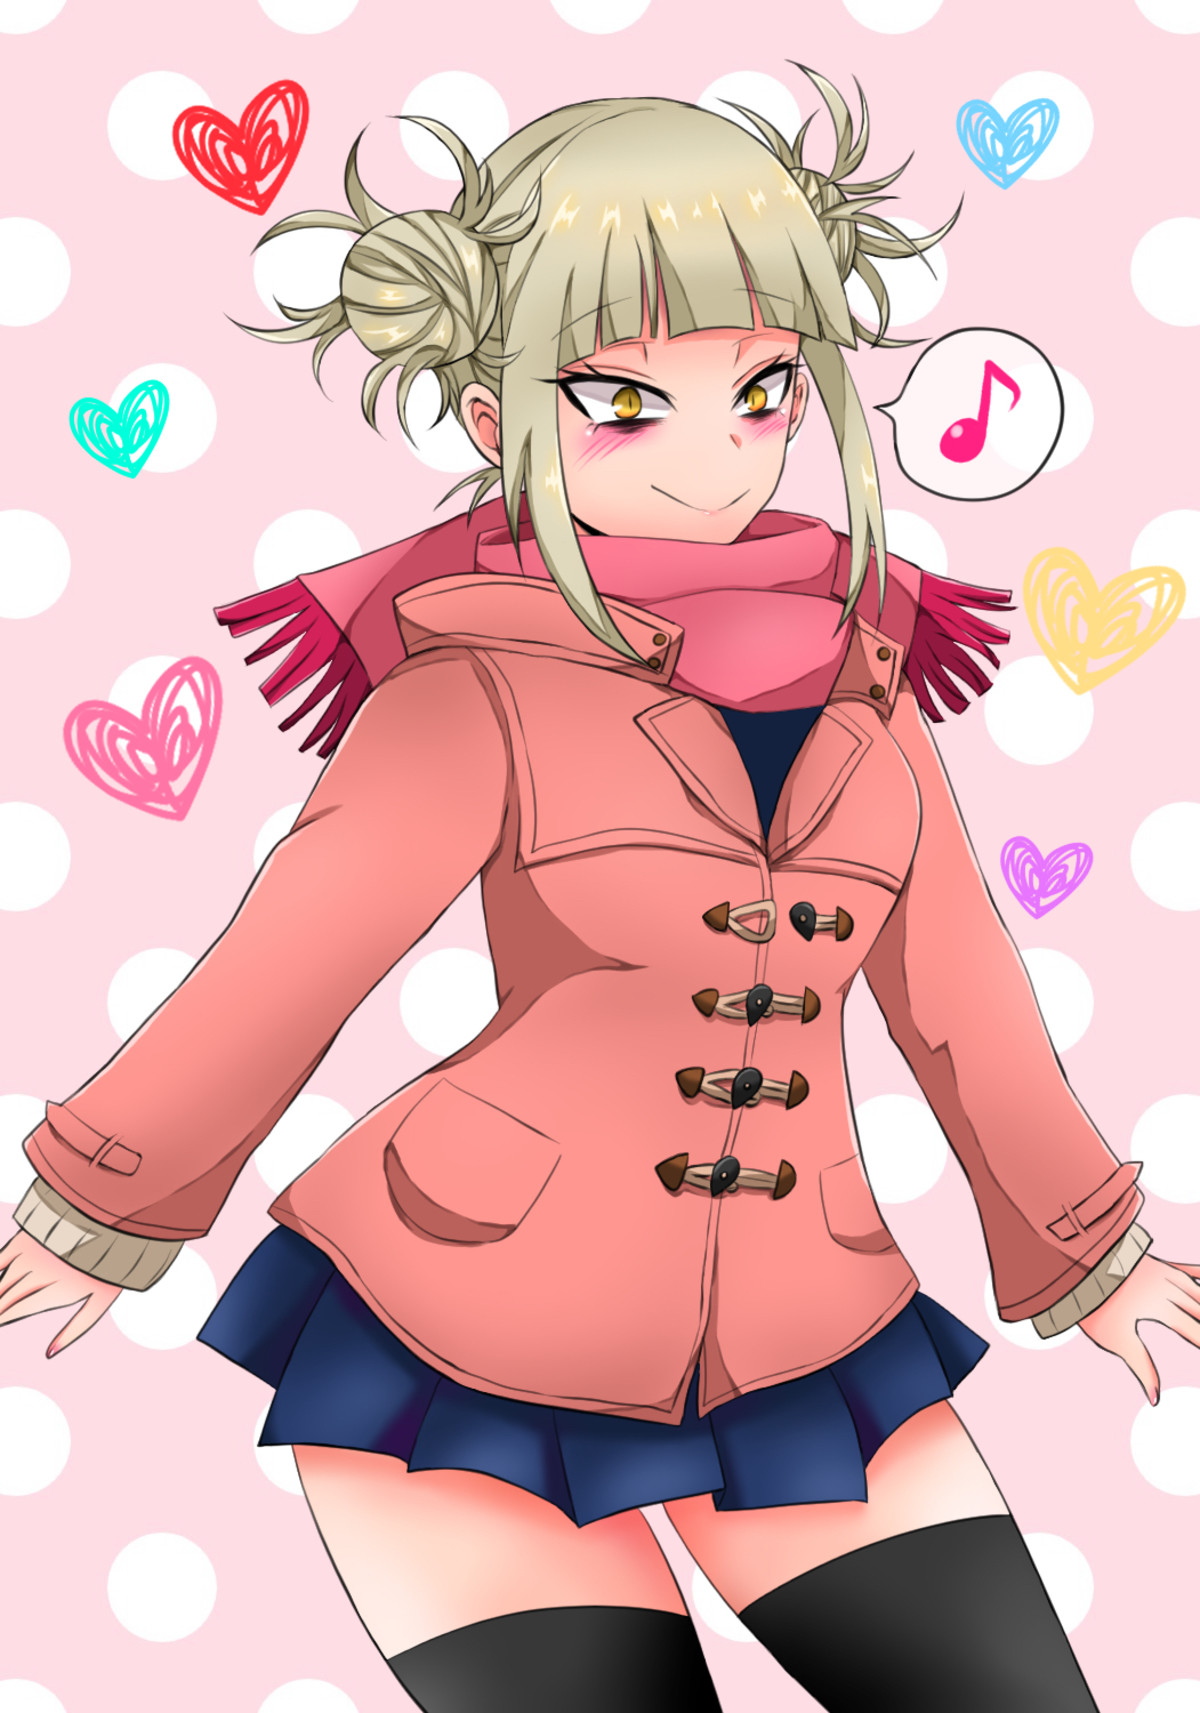 Daily Toga - 960: Cute Toga. join list: DailyToga (477 subs)Mention History Source: .. cute! but she belongs in a straitjacket